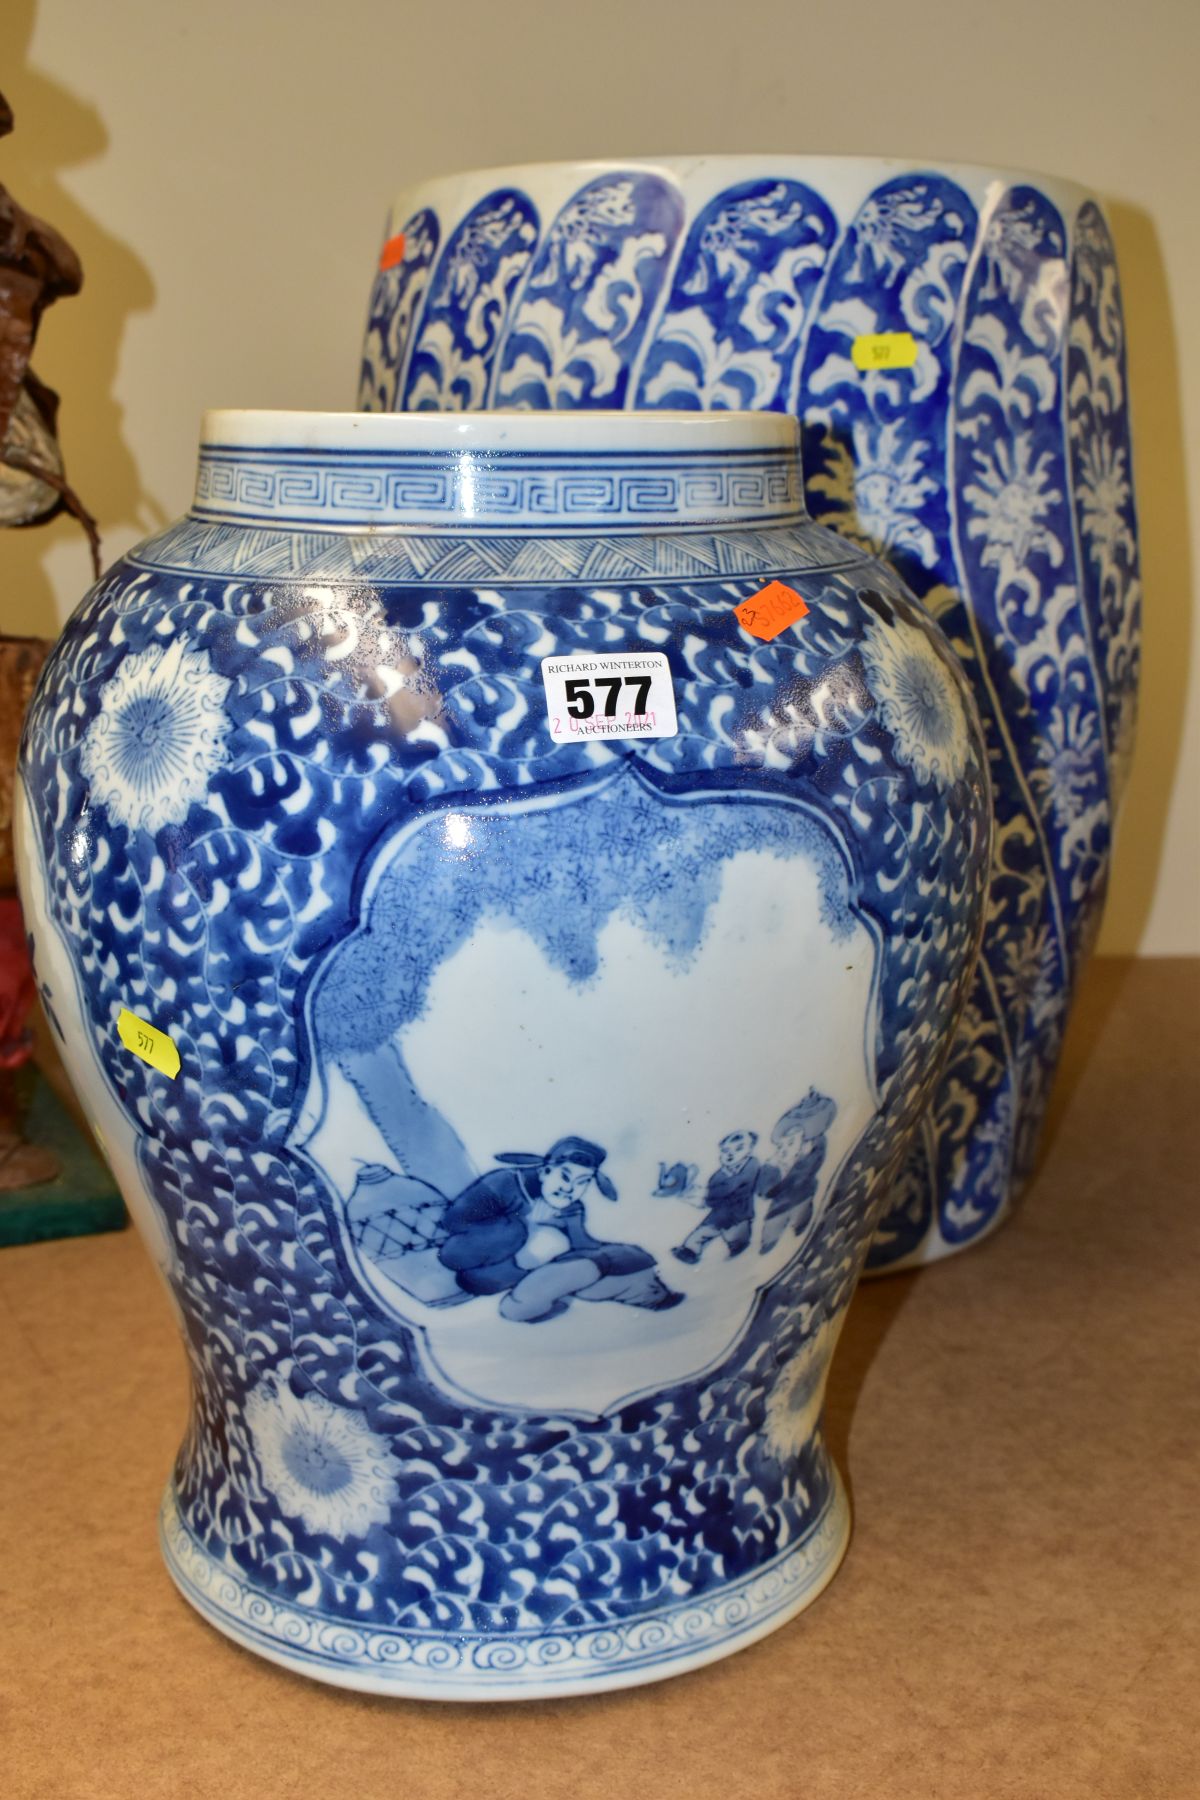 A MODERN CHINESE BARREL STOOL OF WRYTHERN FORM, blue and white floral decoration, approximate height